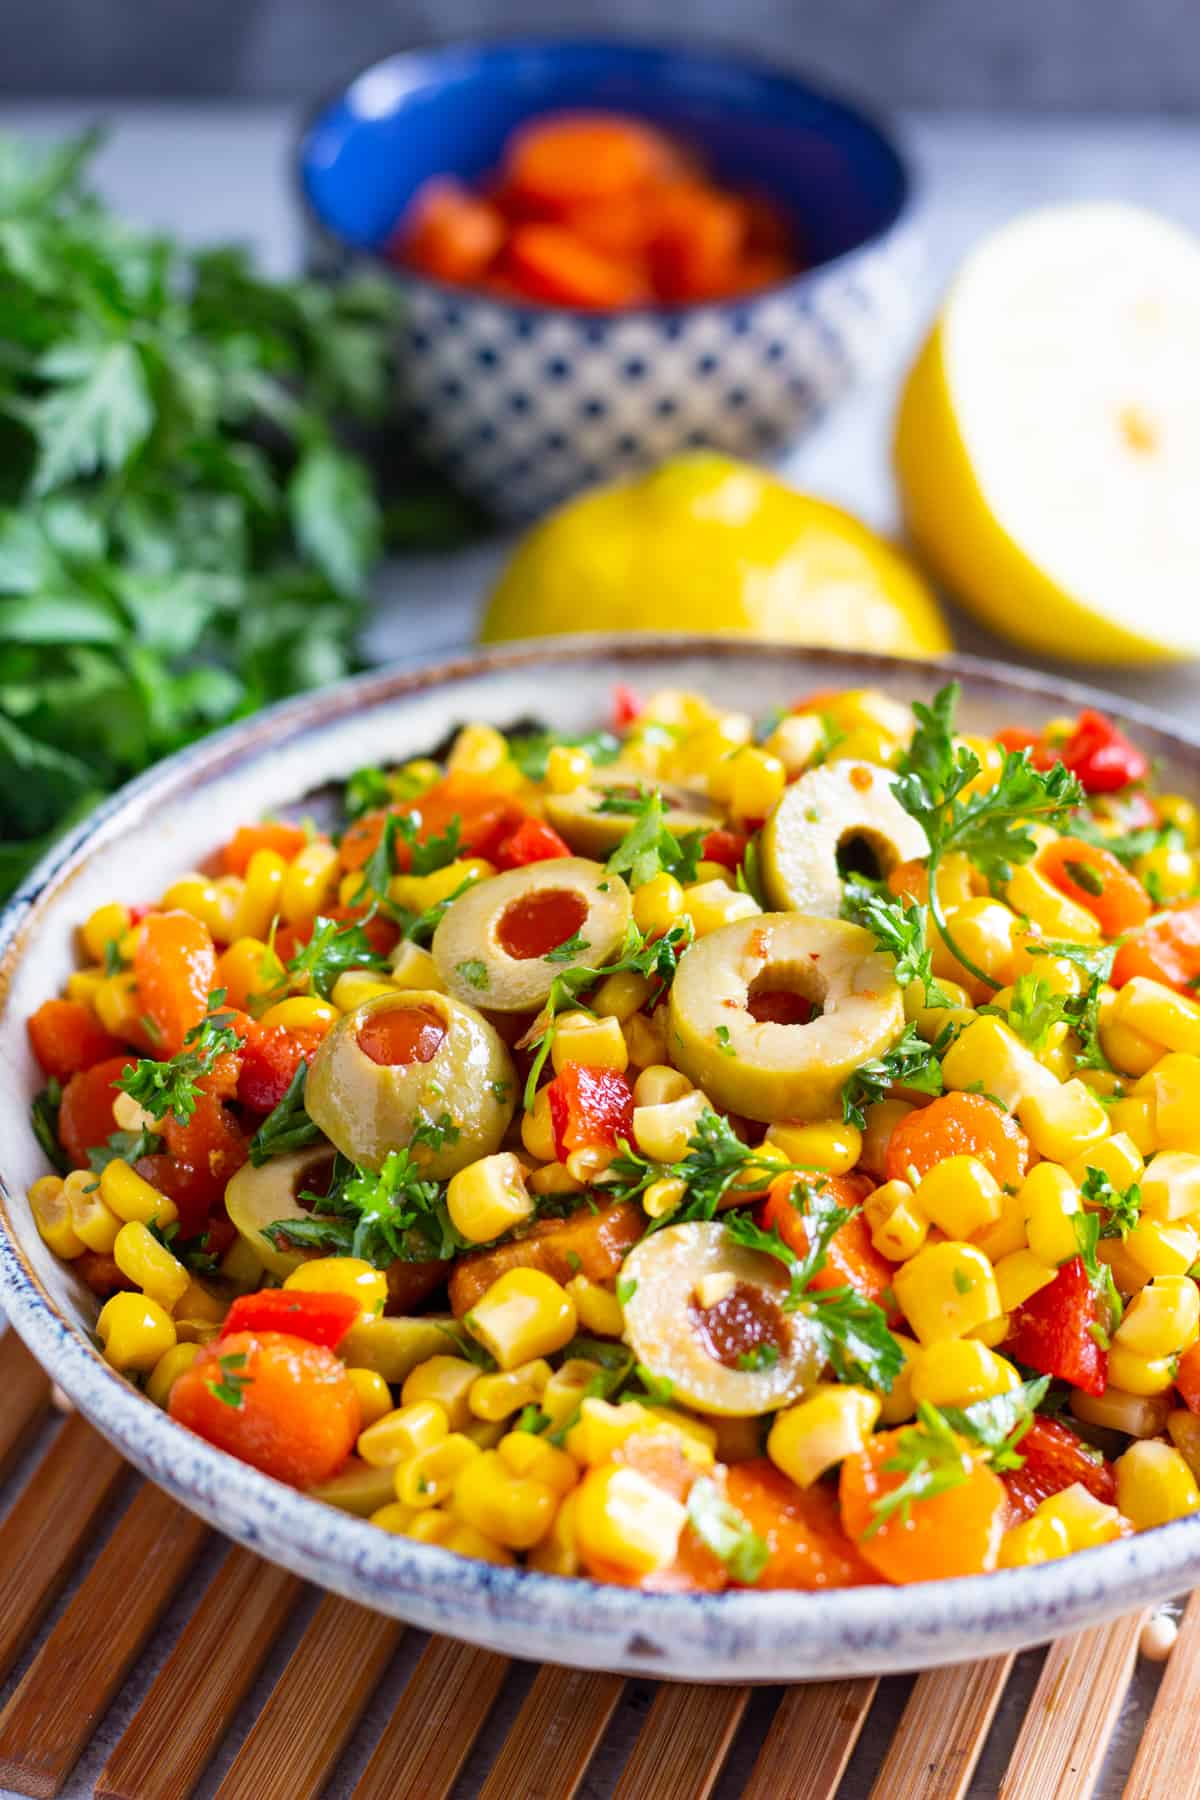 This Mediterranean corn salad is easy, delicious ready in 10 minutes!. Drizzled with a zesty dressing, this is the perfect summer salad!
